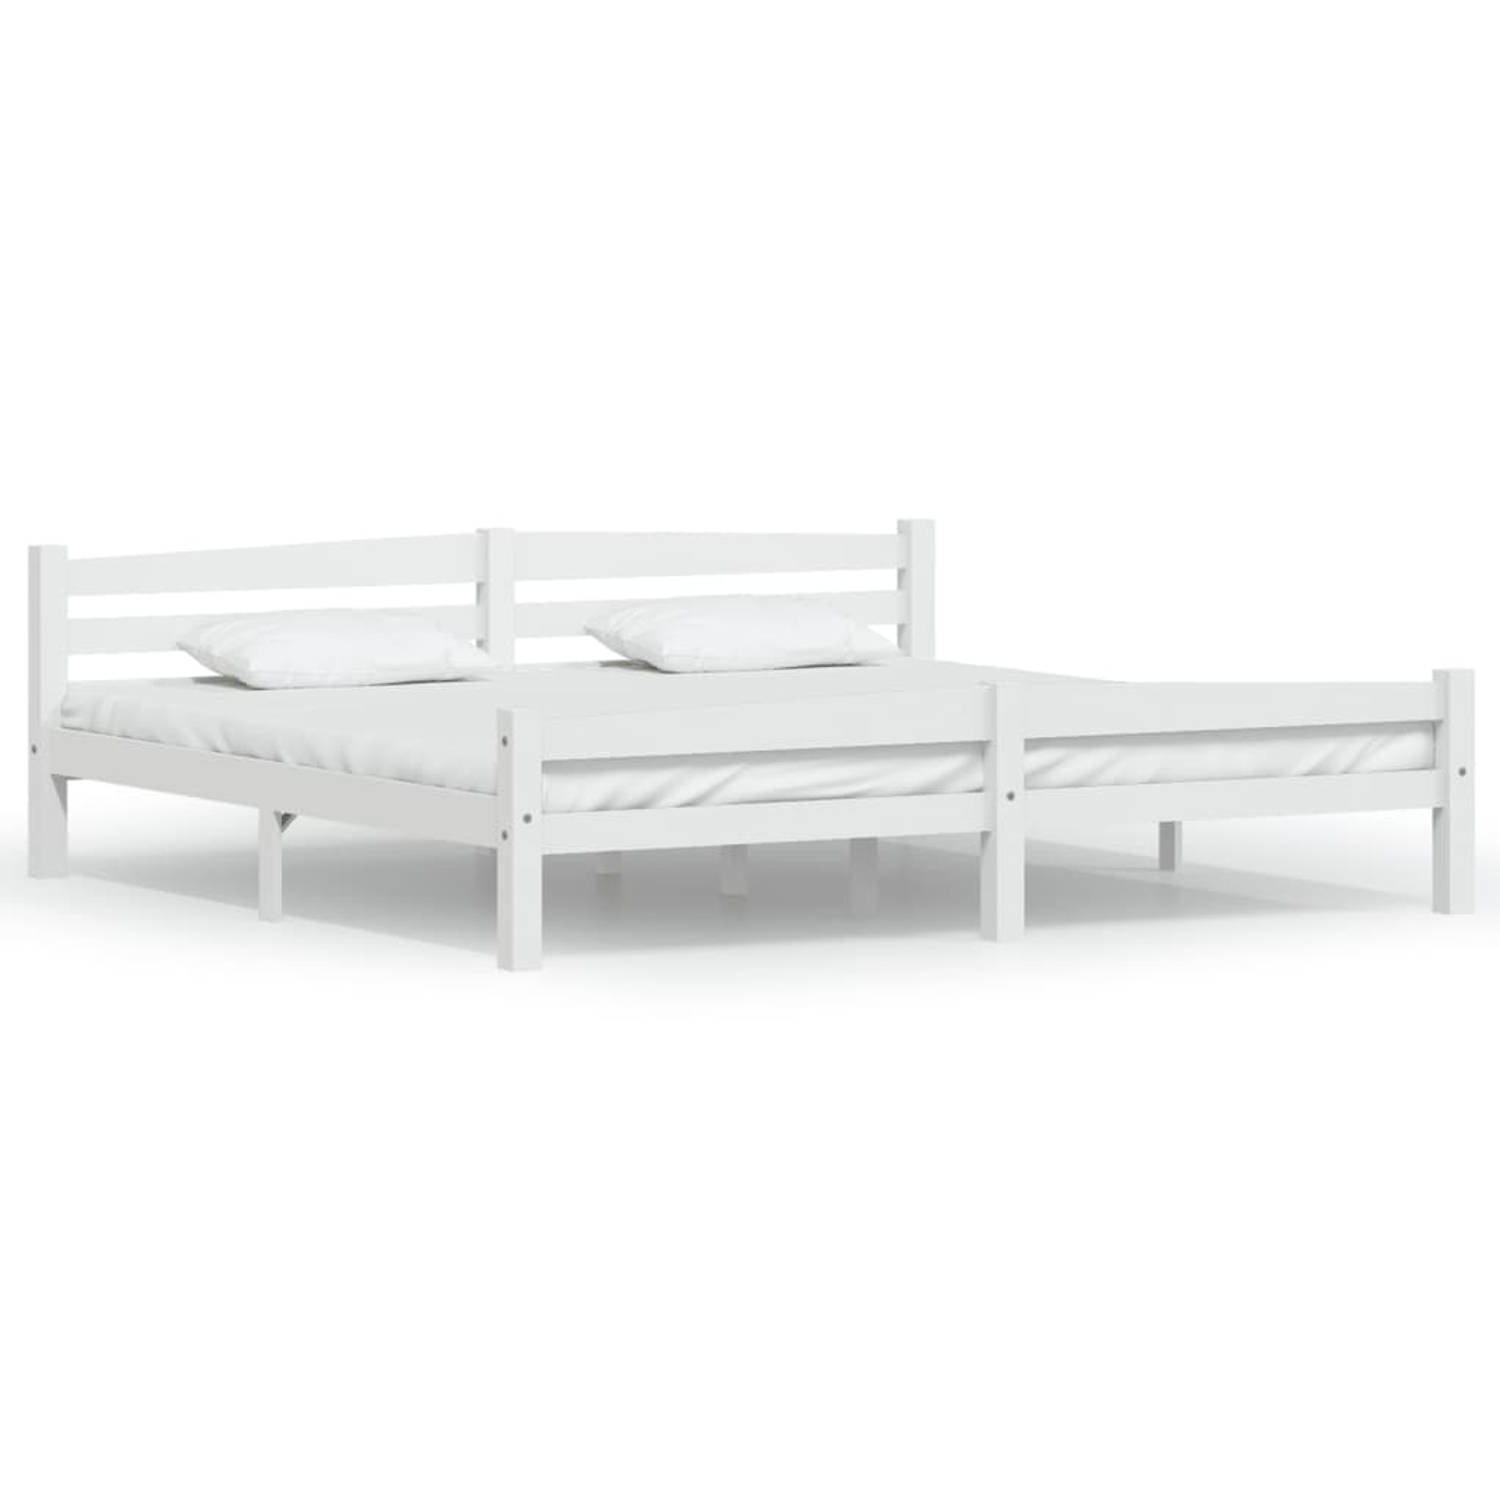 The Living Store Bedframe massief grenenhout wit 200x200 cm - Bedframe - Bedframe - Bed Frame - Bed Frames - Bed - Bedden - 2-persoonsbed - 2-persoonsbedden - Tweepersoons Bed